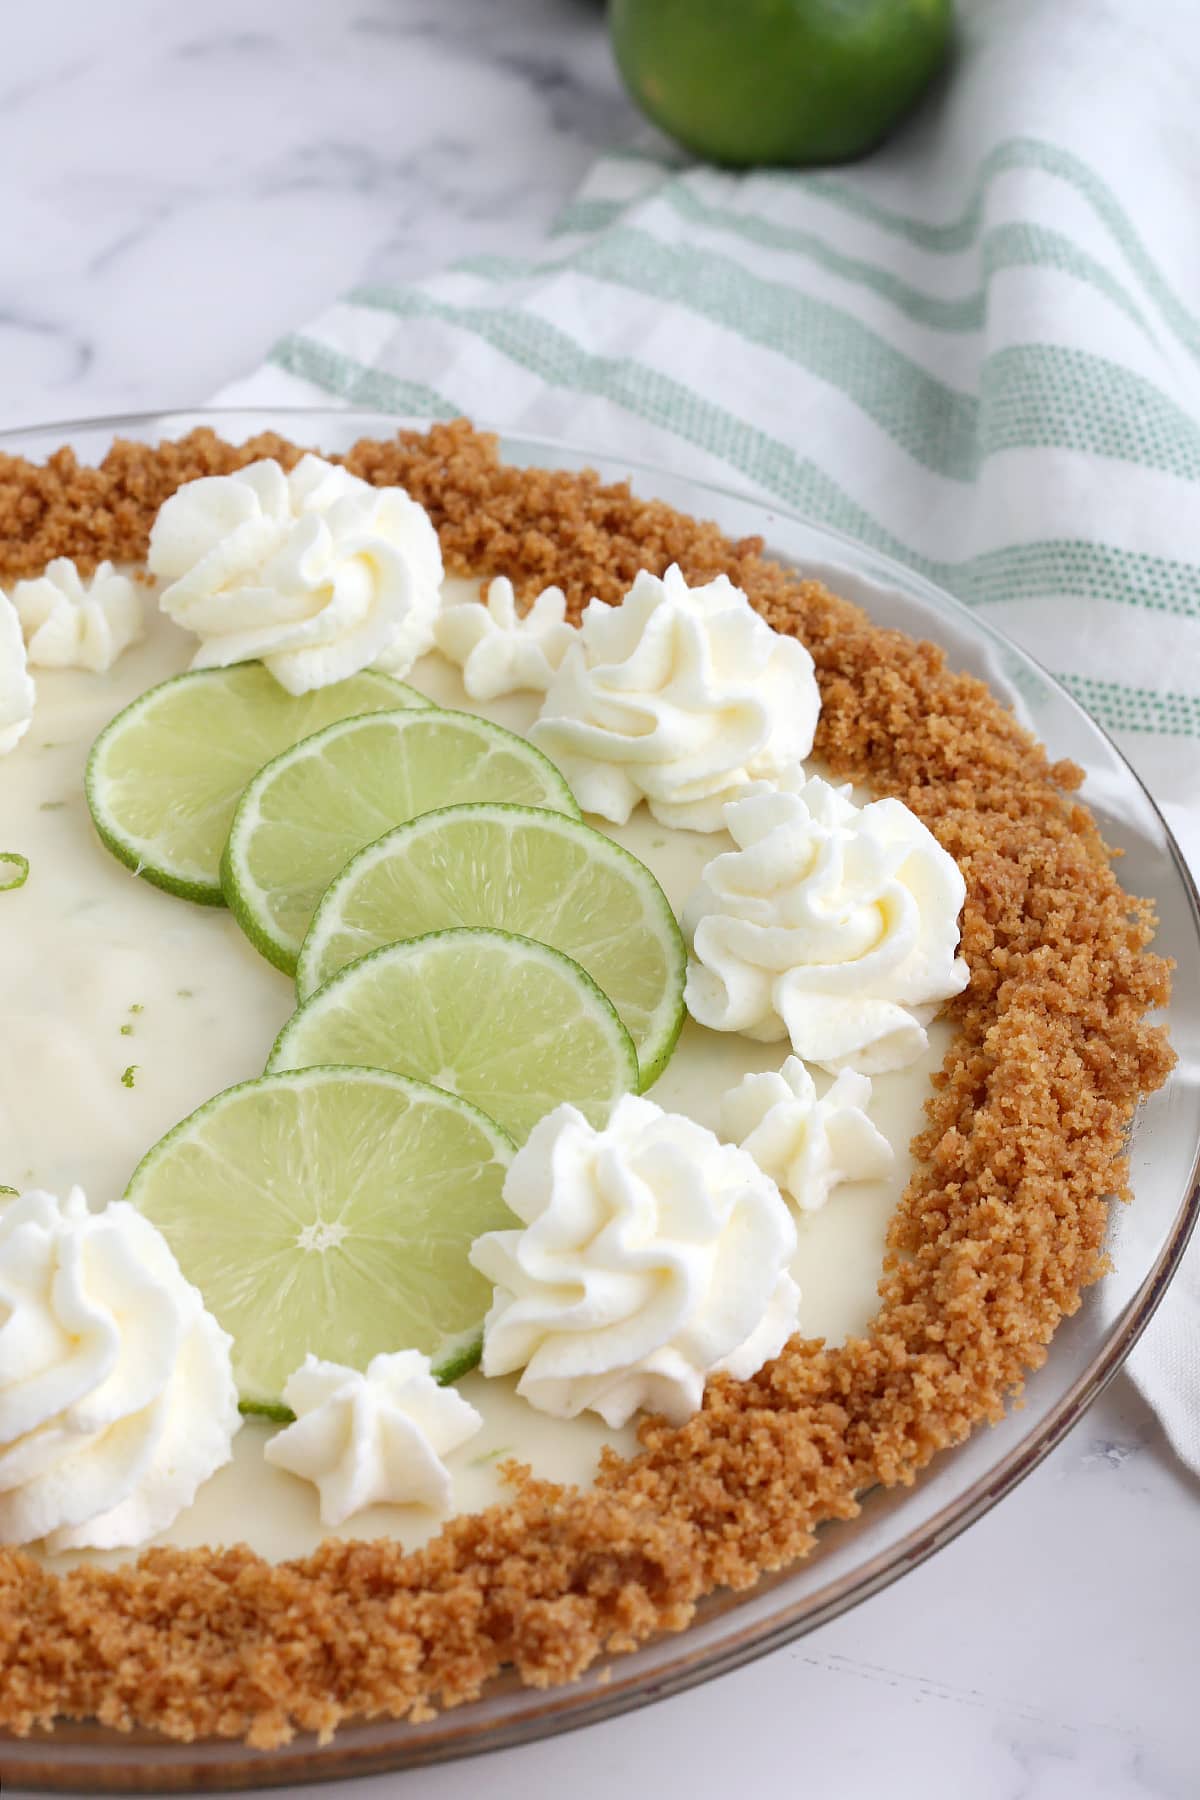 A close up picture of key lime pie topped with whipped cream and thinly sliced limes.